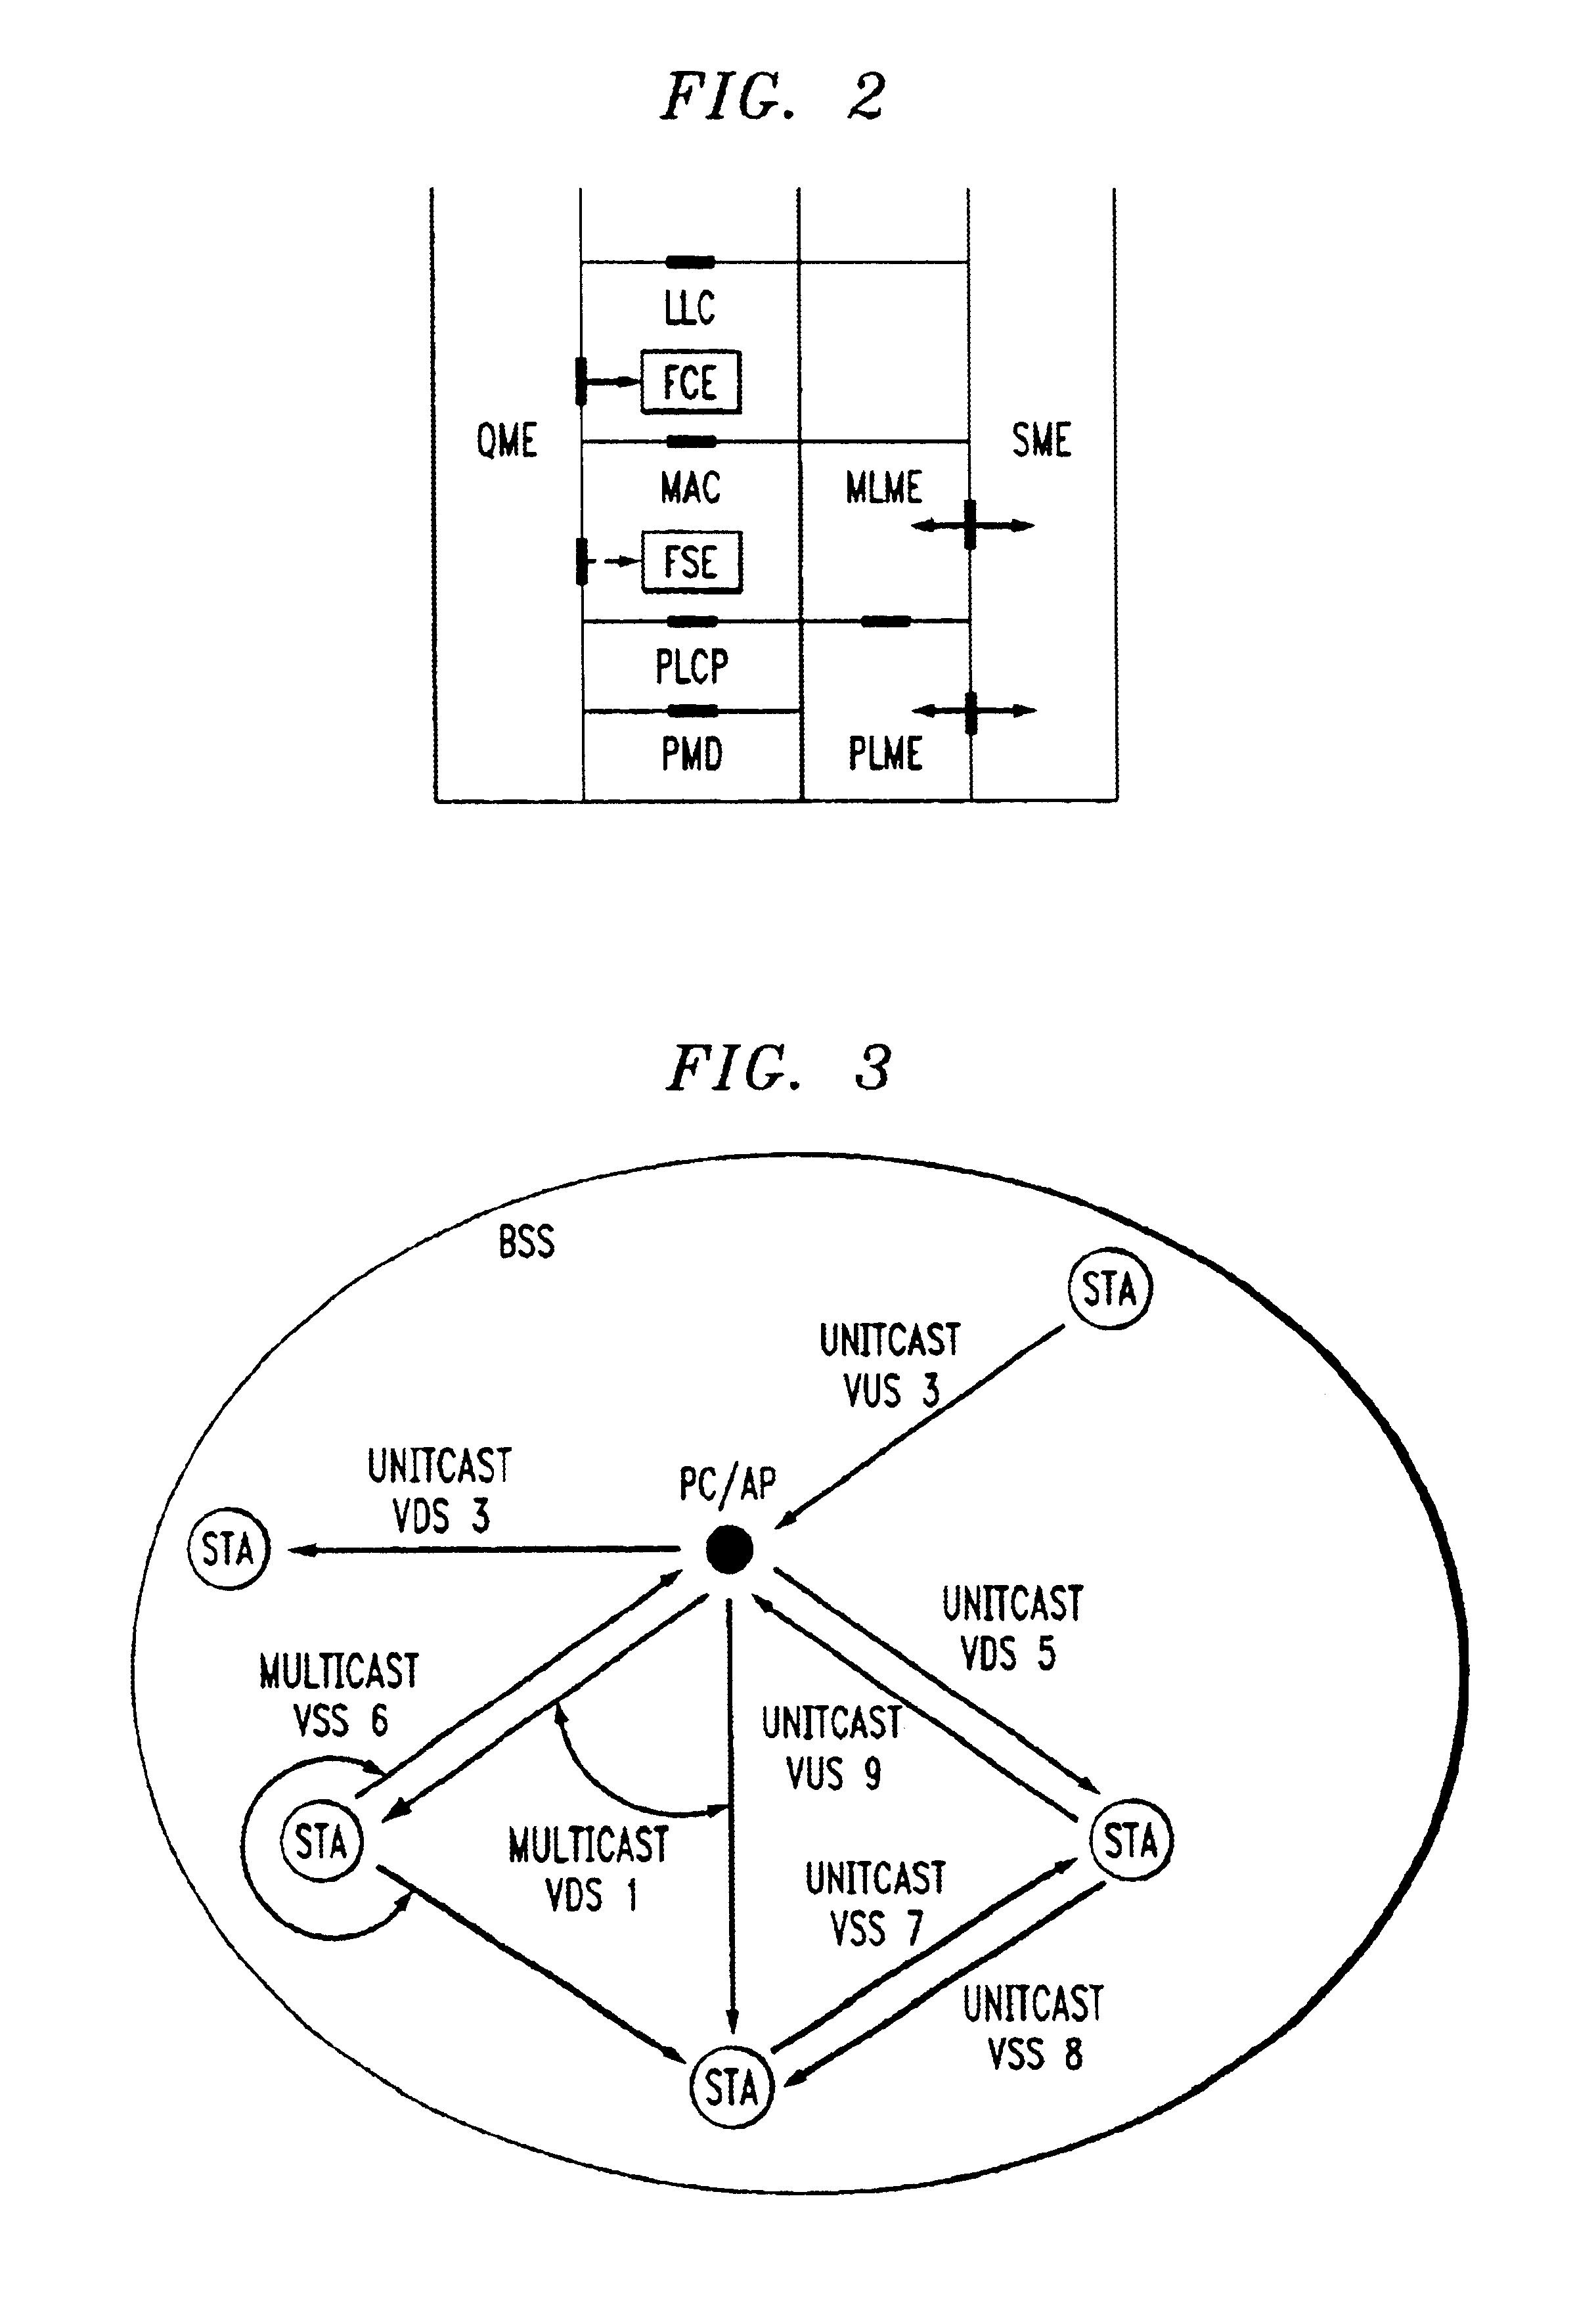 System and method of frame scheduling for QoS-driven wireless local area network (WLAN)